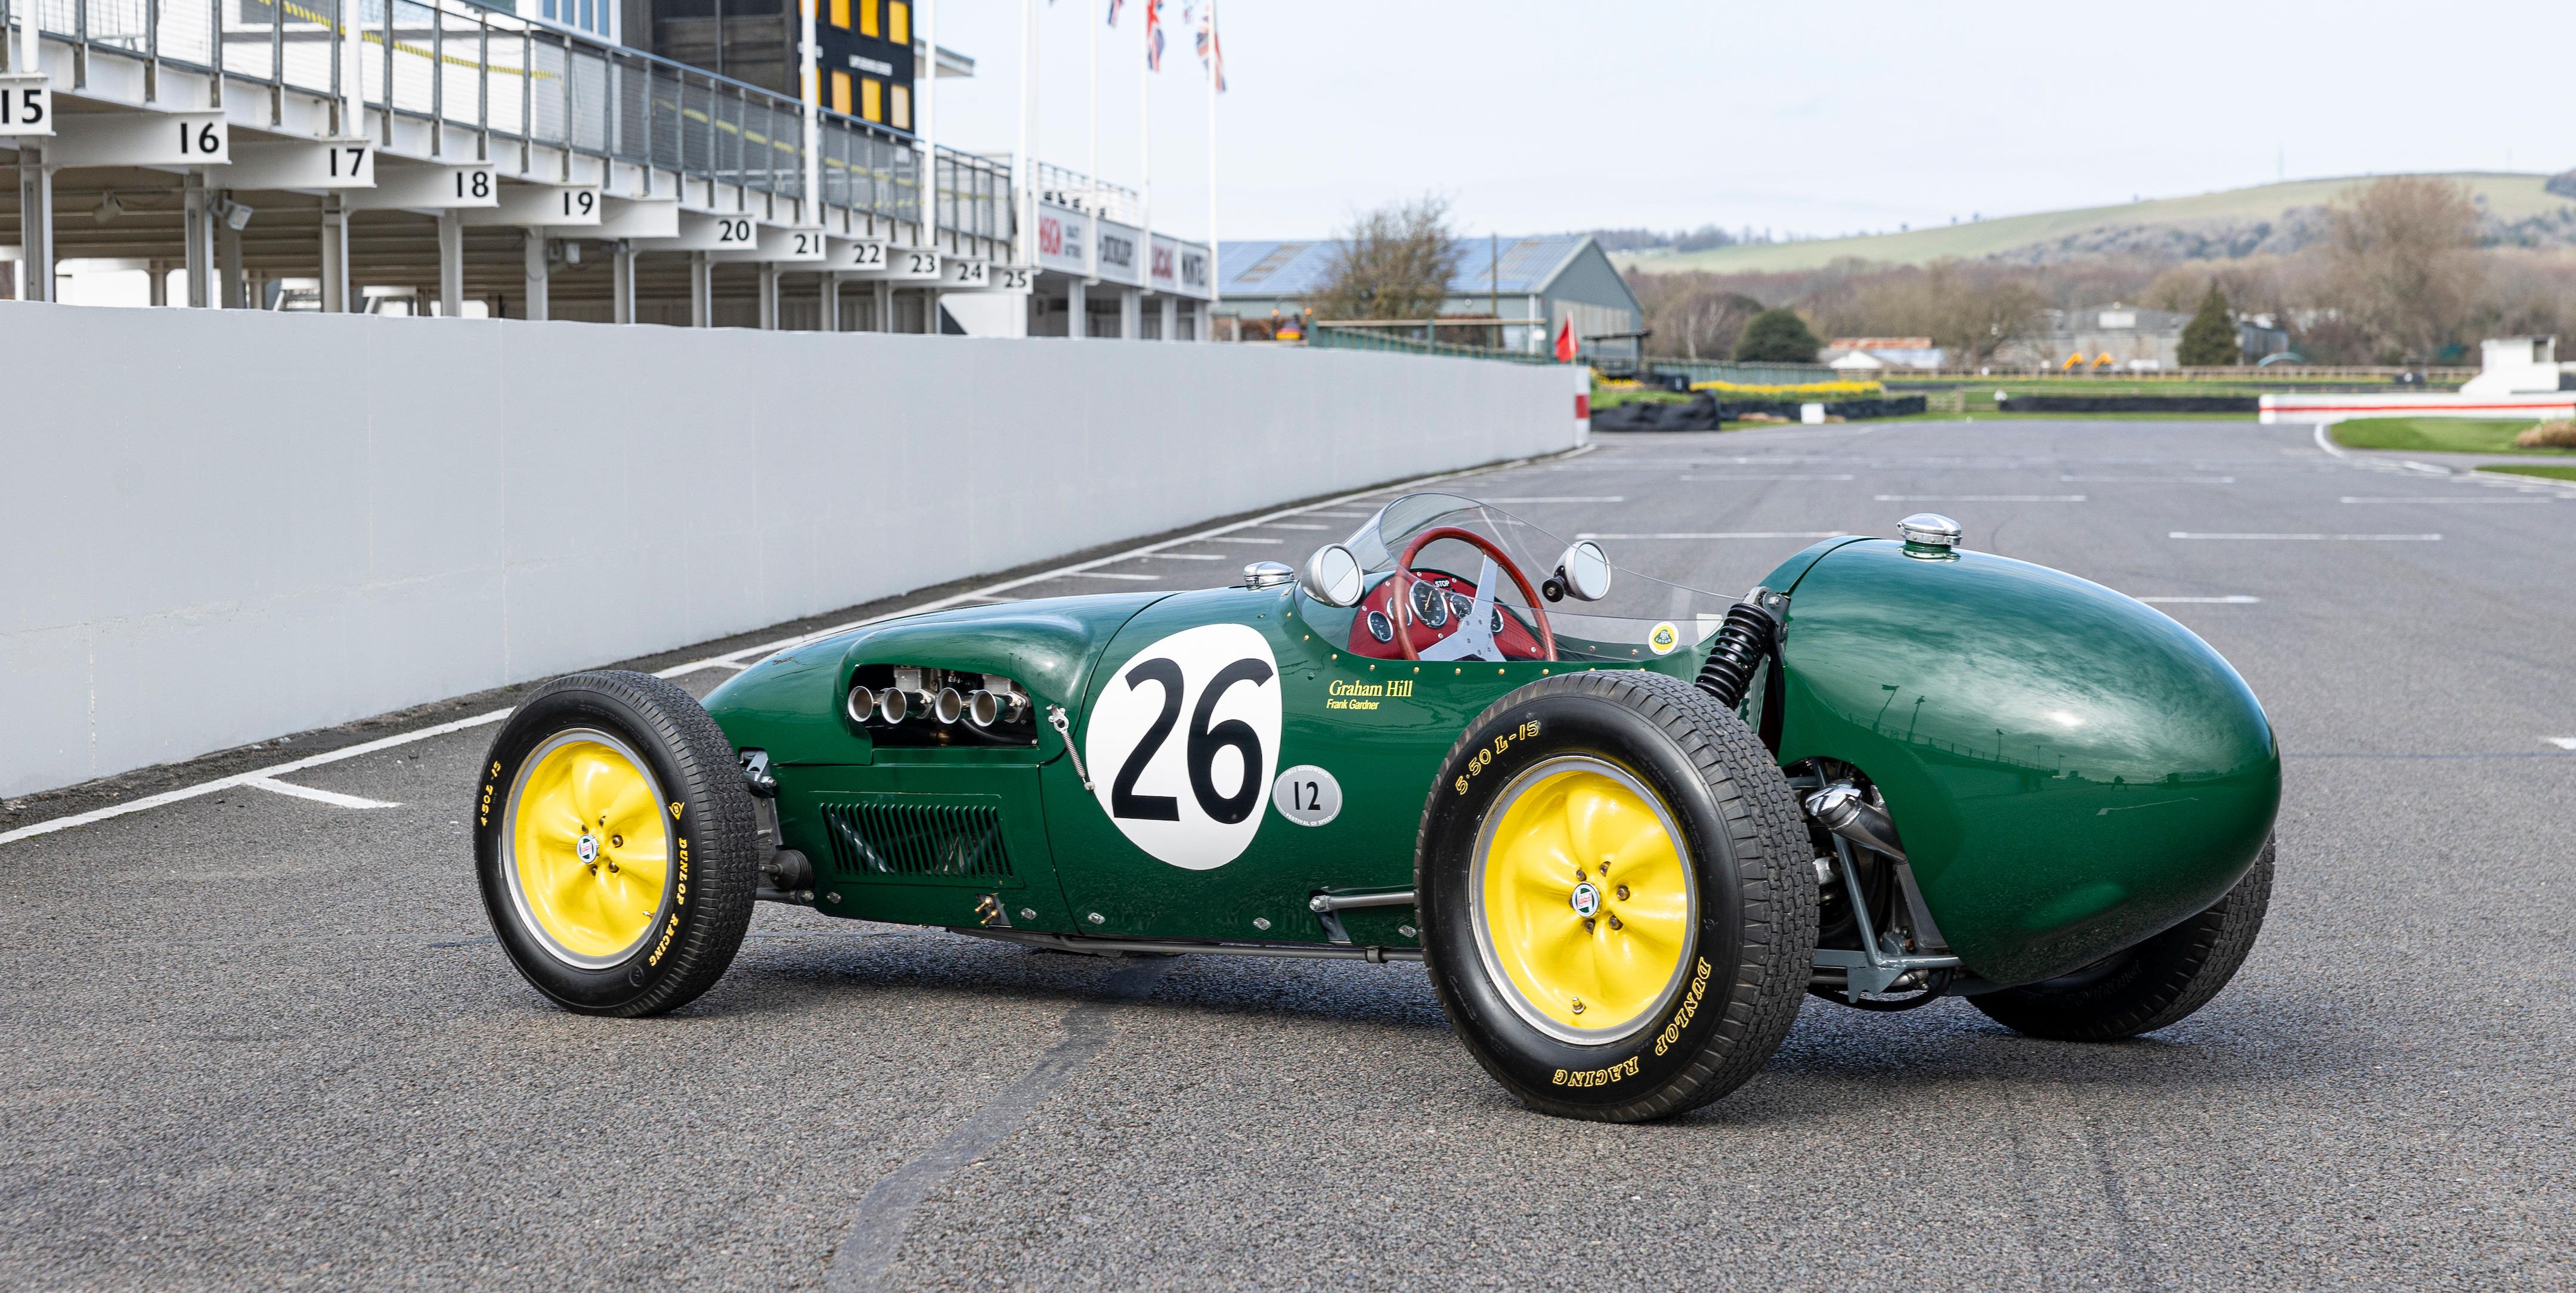 You Can Buy the First Ever Lotus F1 Car